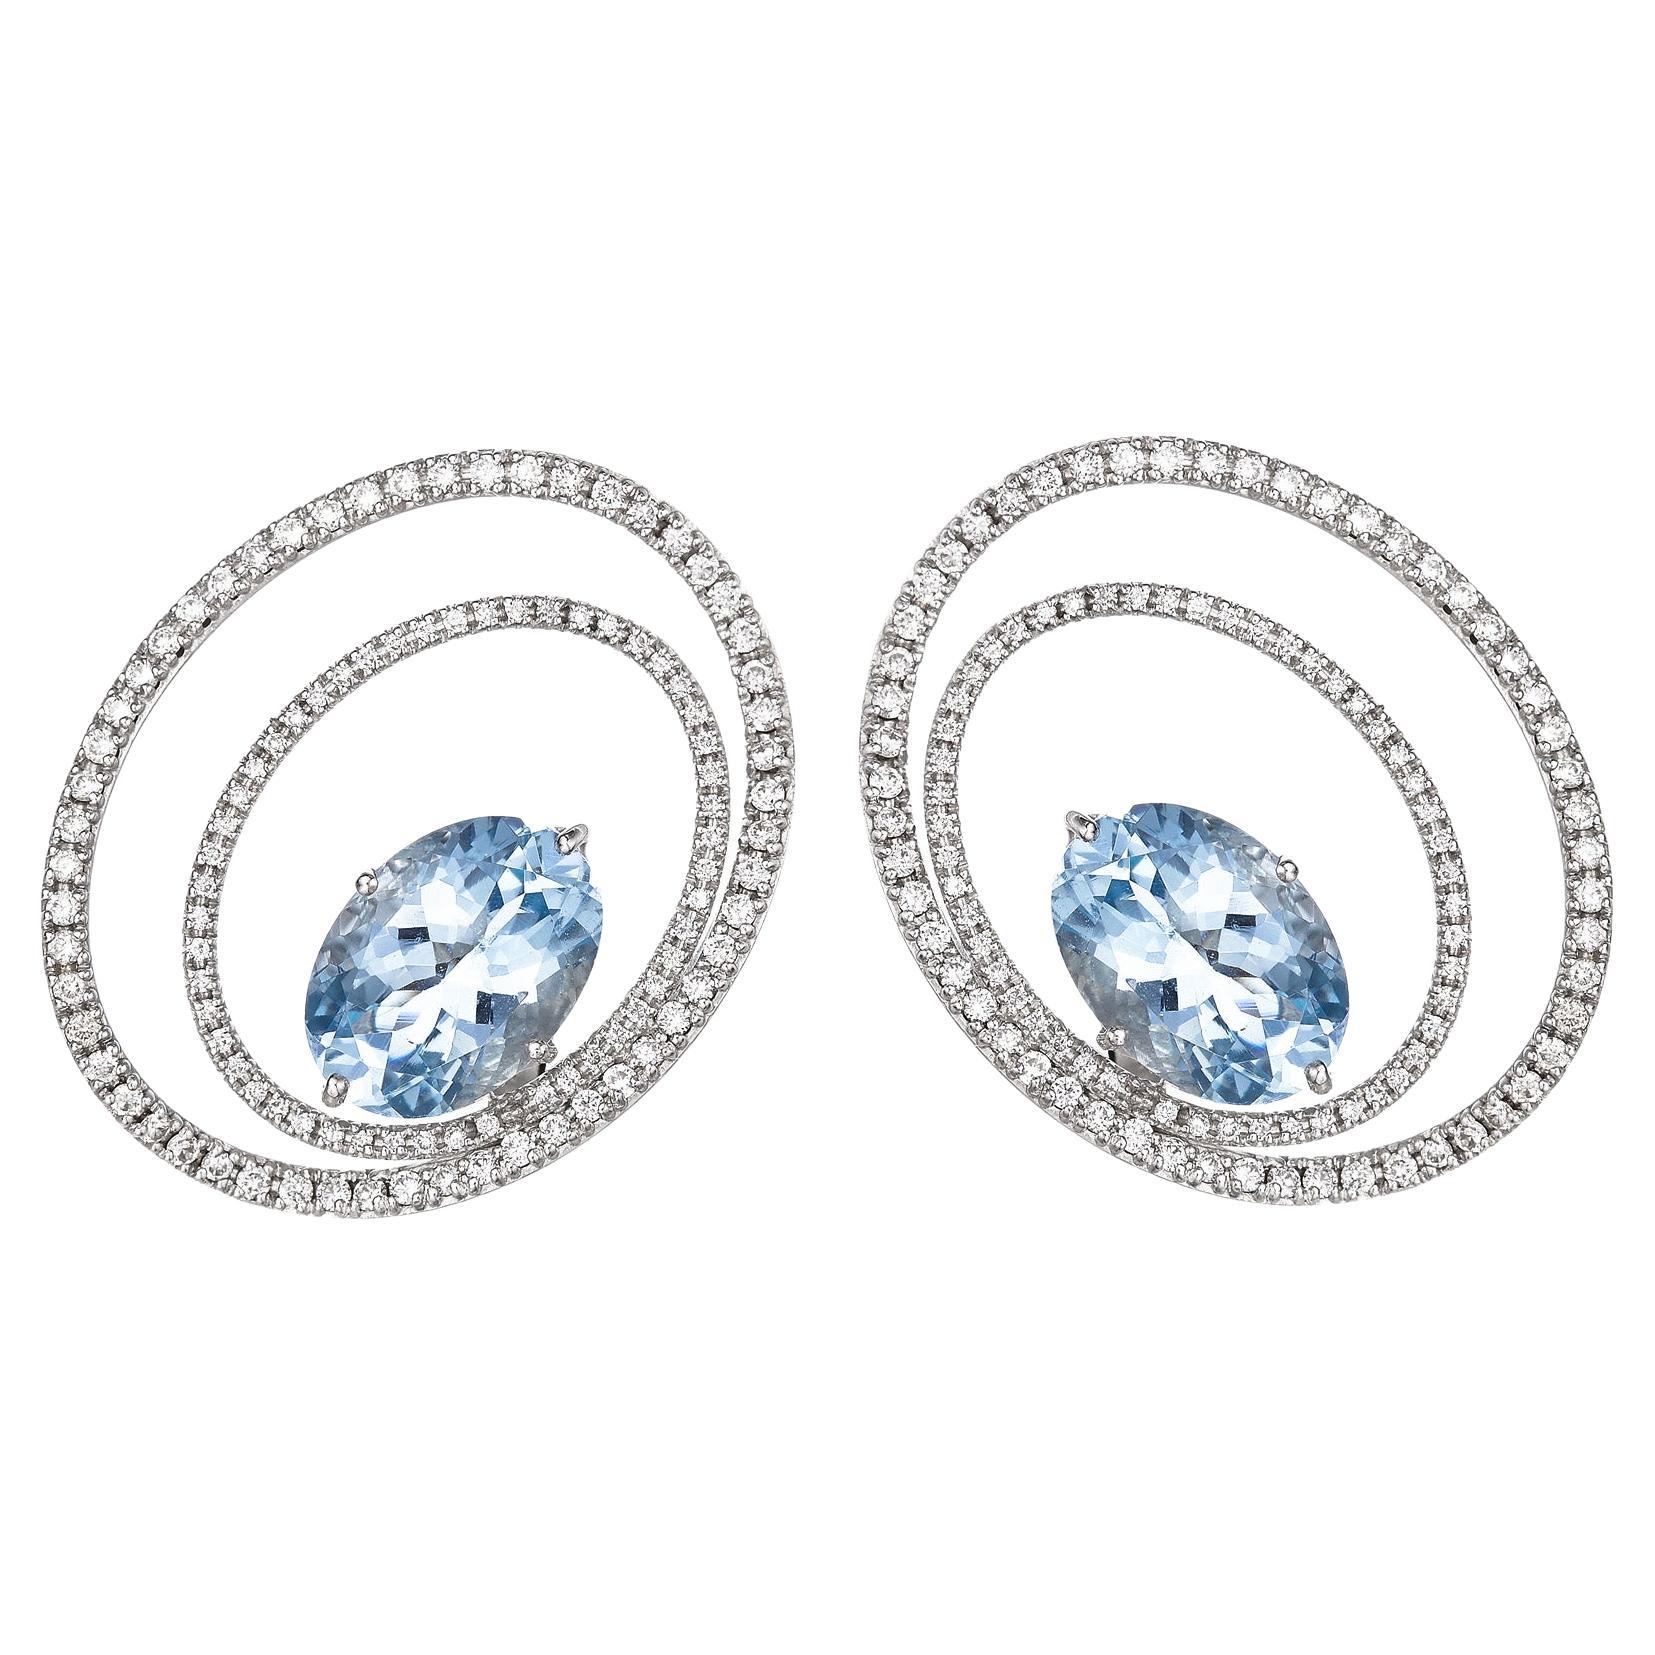 18K White Gold 10ct Aquamarine 2ct Diamond Climber Statement Empowering Leverback Earrings.
Unlock Your Divine Potential with the Special Balance of Saturno Earrings.
 Gems and metal are energetically cleansed to emit their best vibrations.
The